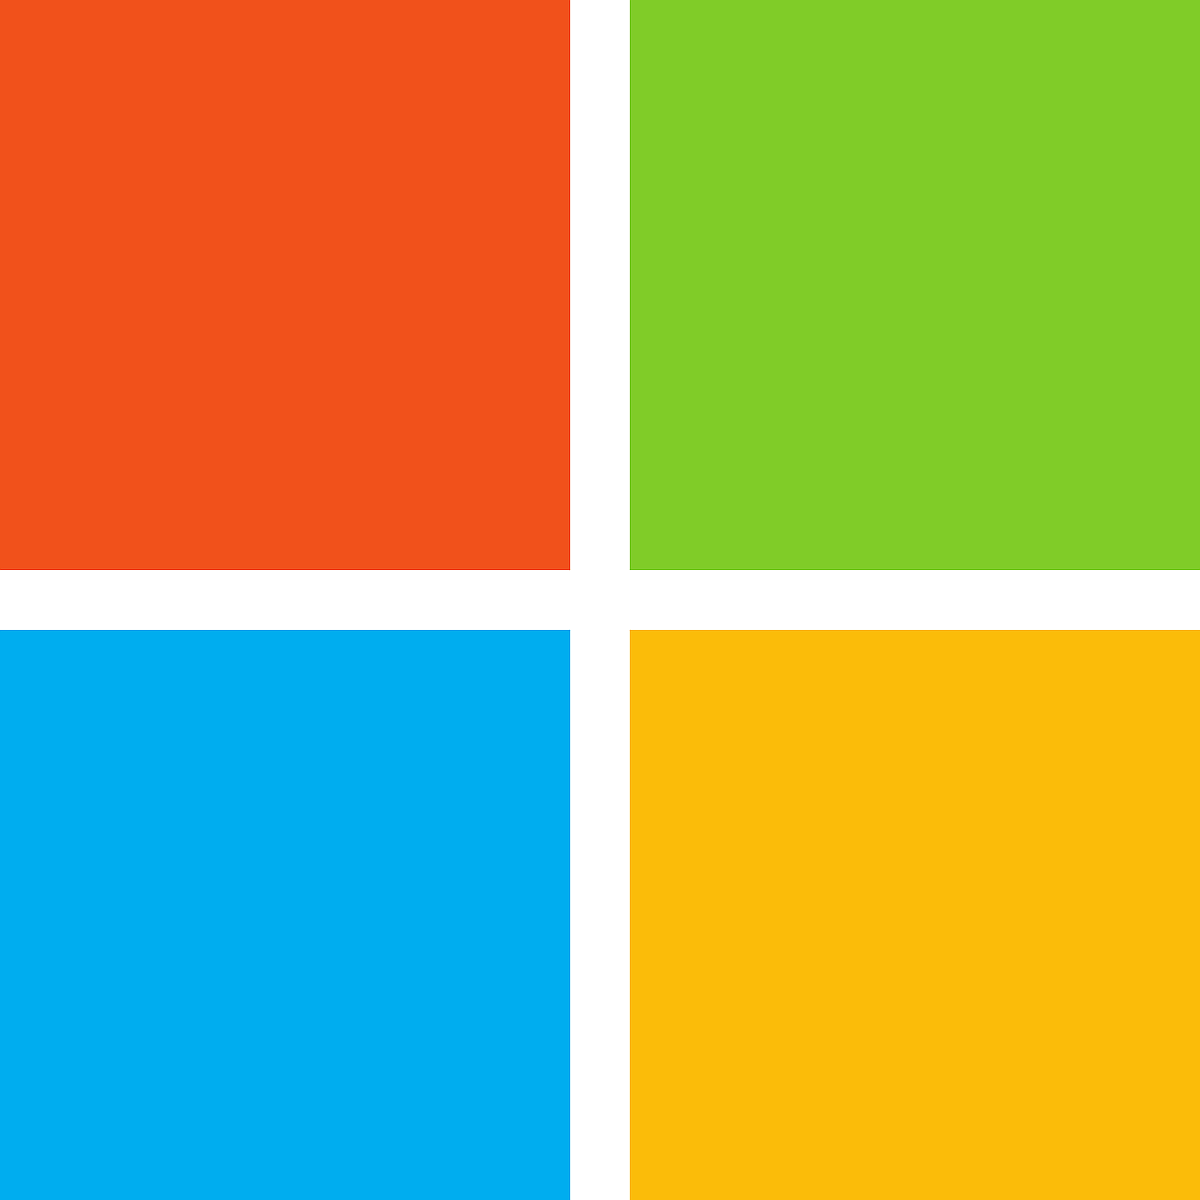 UWP apps end support